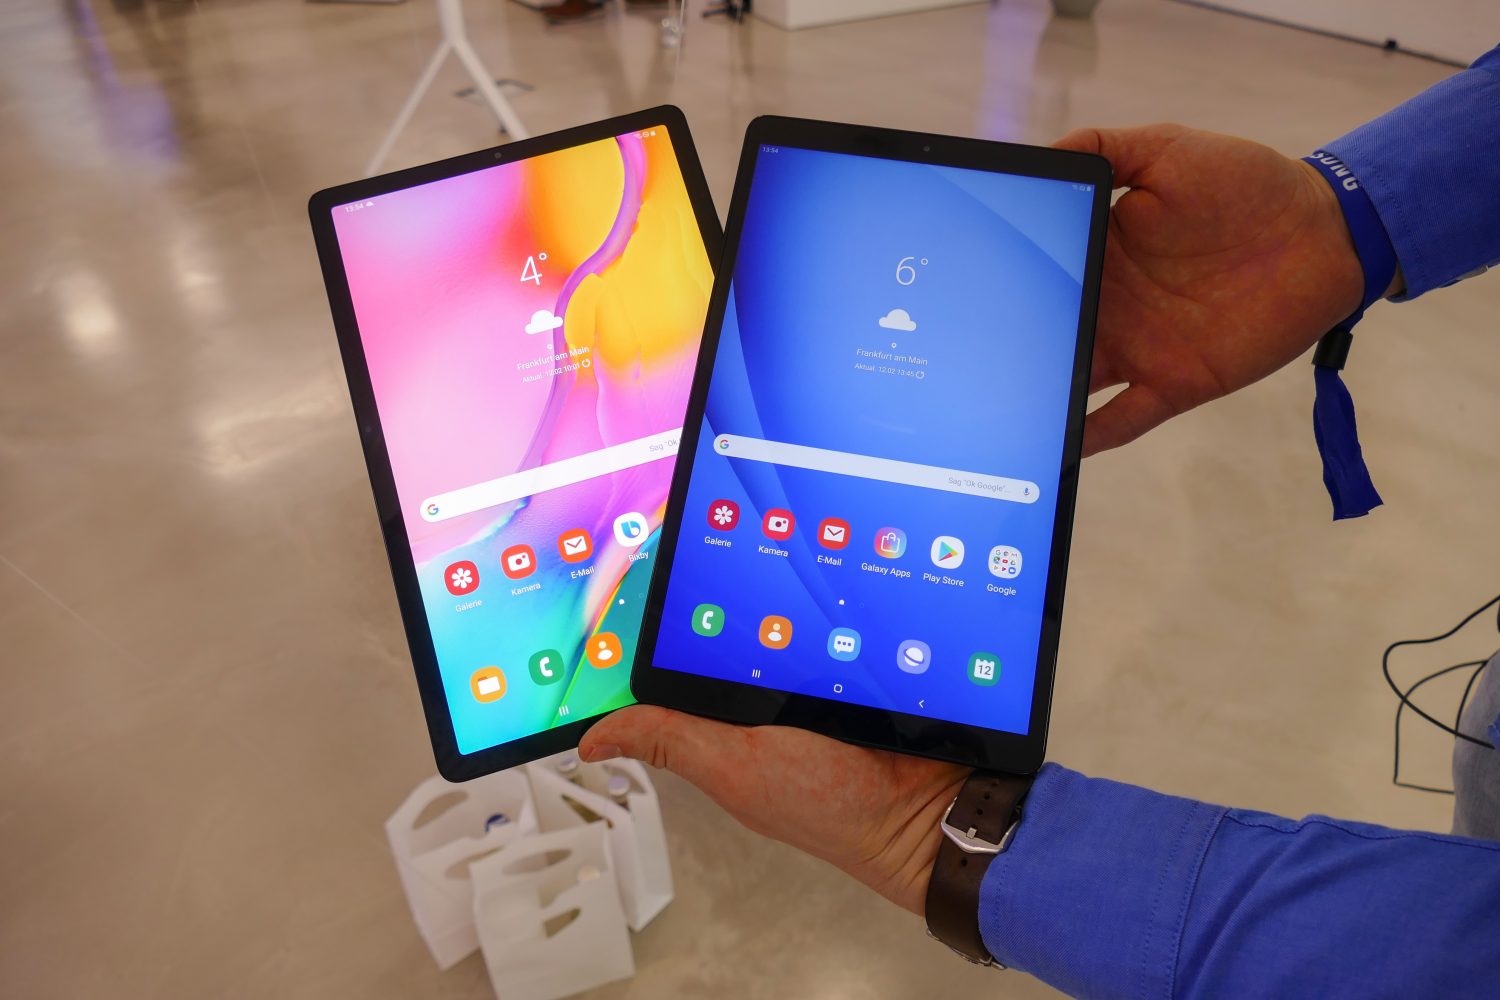 Galaxy Tab A 10.1 (2019) unveiled with metal body, Android